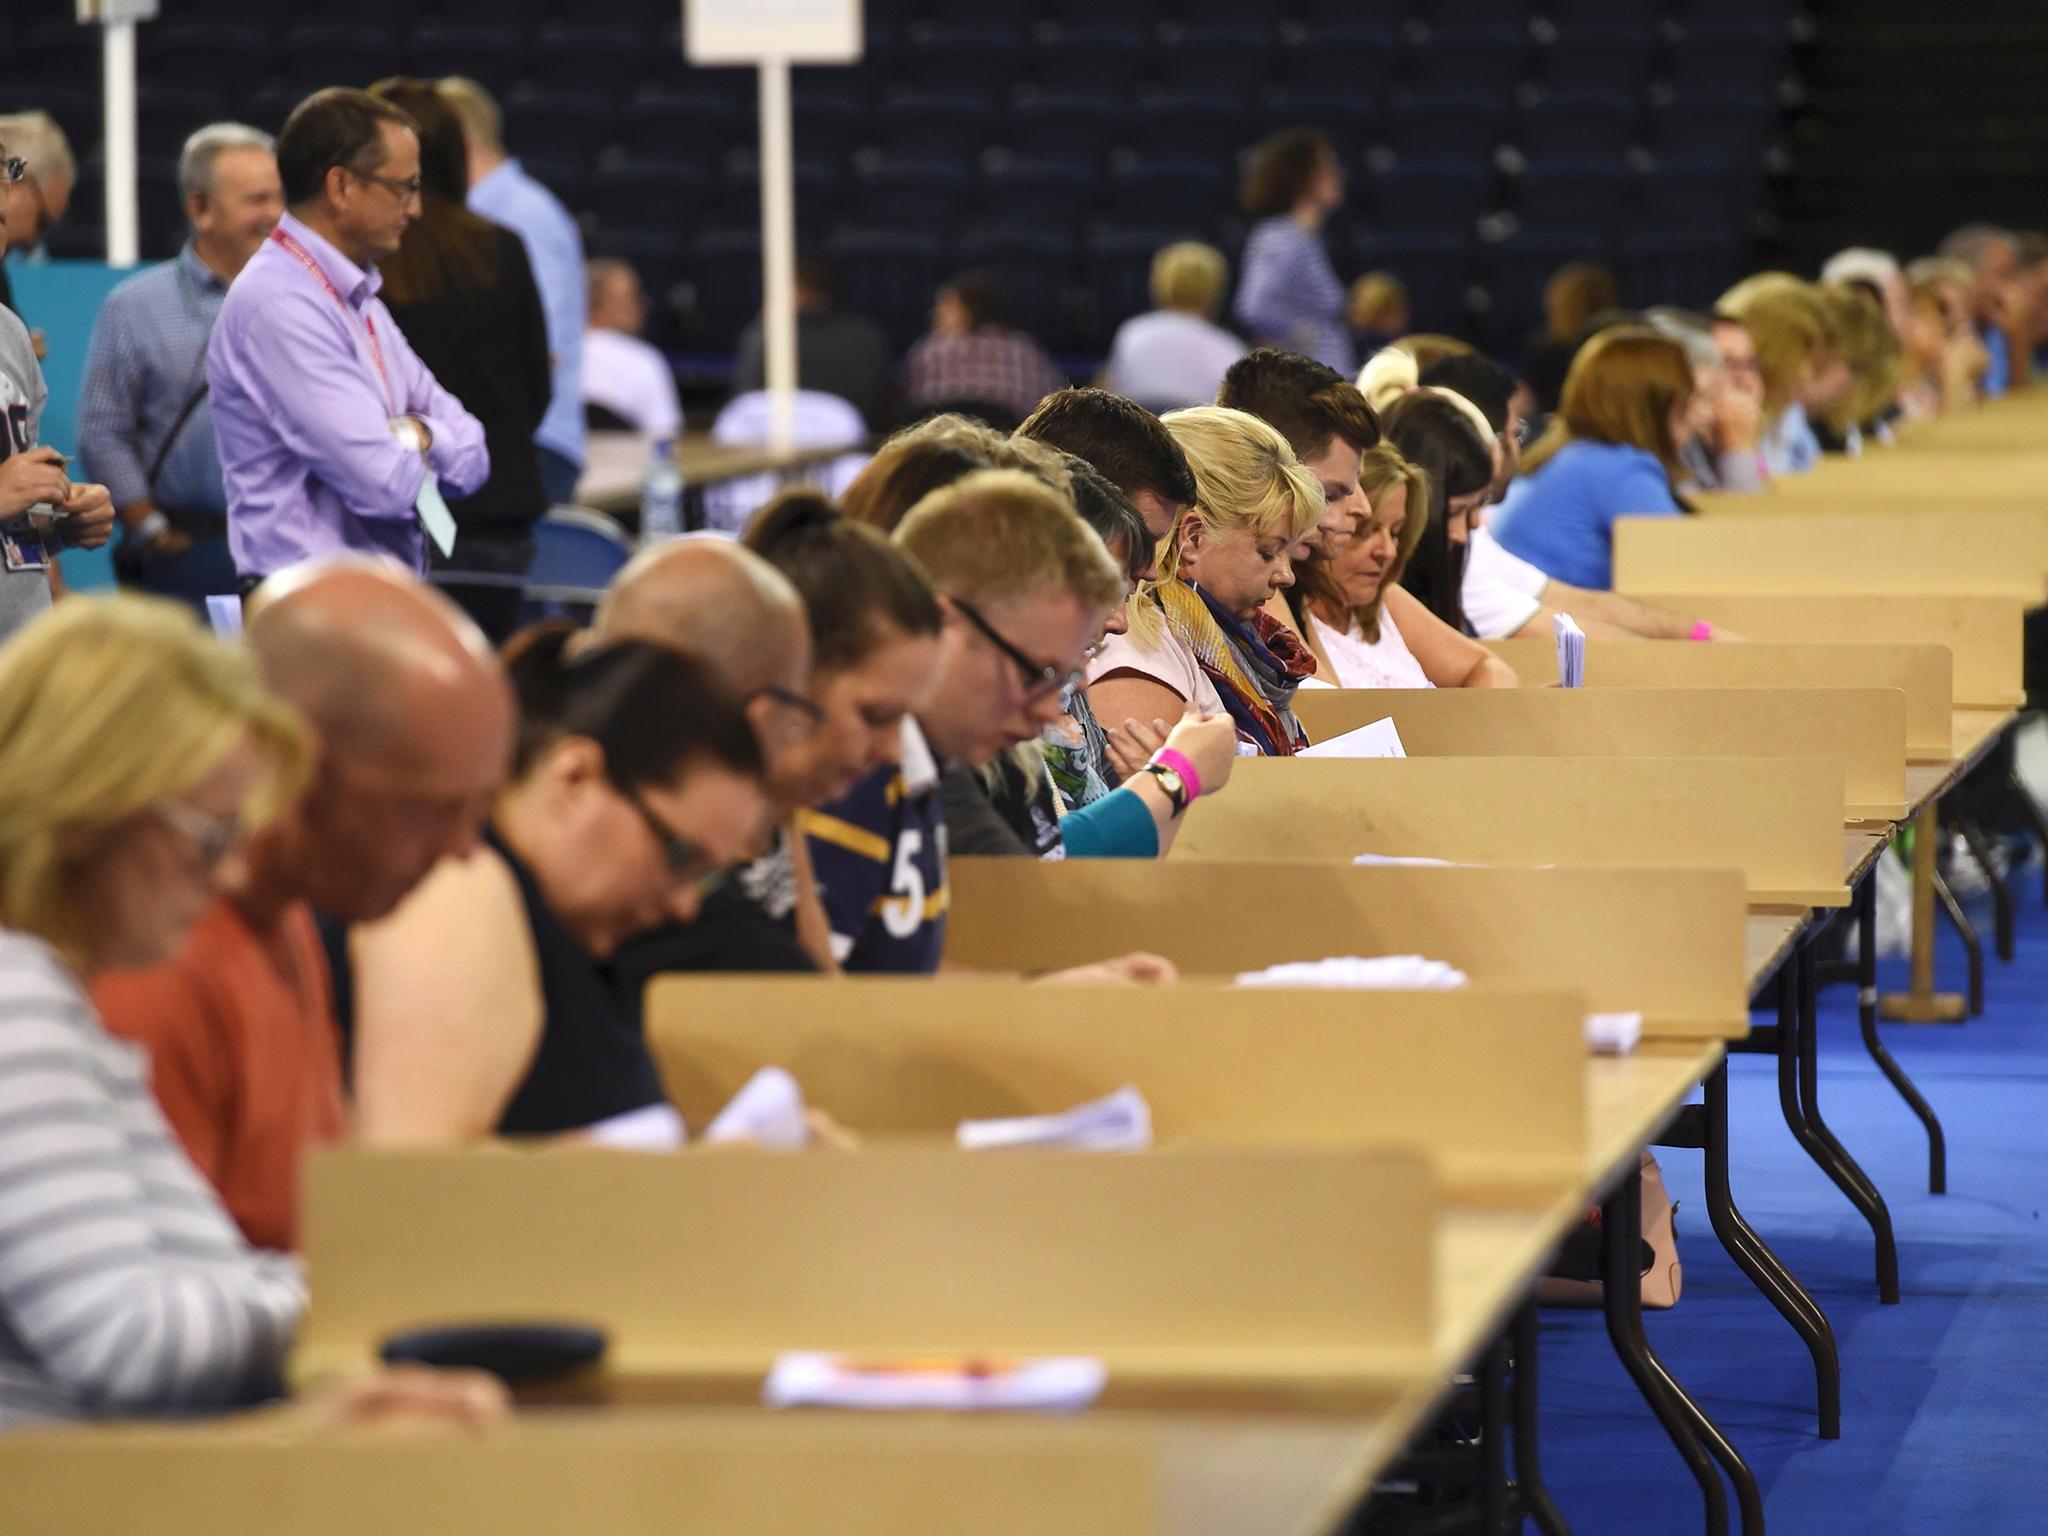 Workers begin counting ballots after polling stations closed in Glasgow